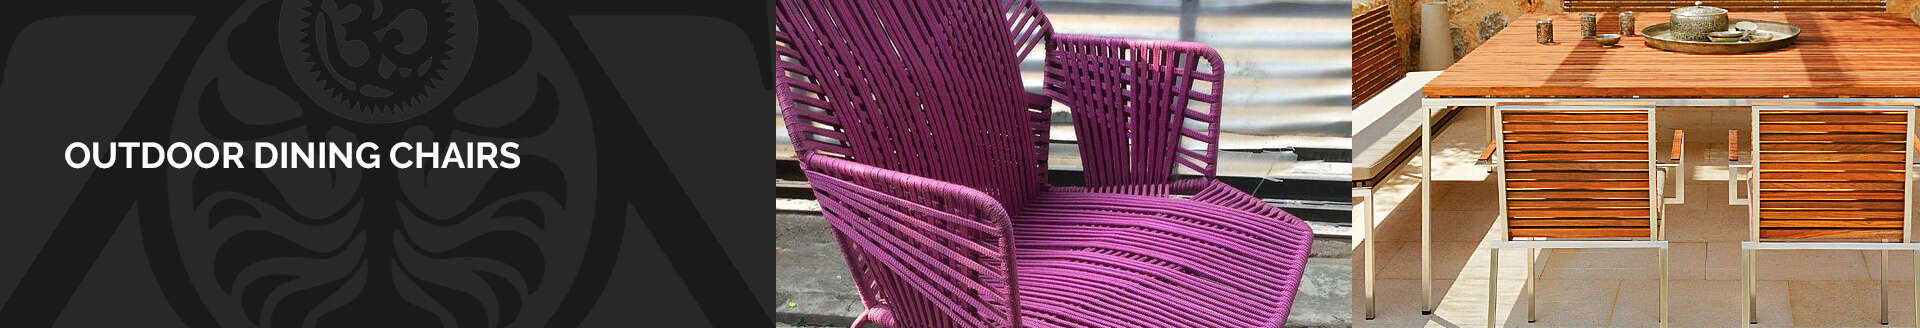 outdoor dining chairs catalogue manufacturers indonesia exporters wholesalers suppliers bali java jepara zenddu